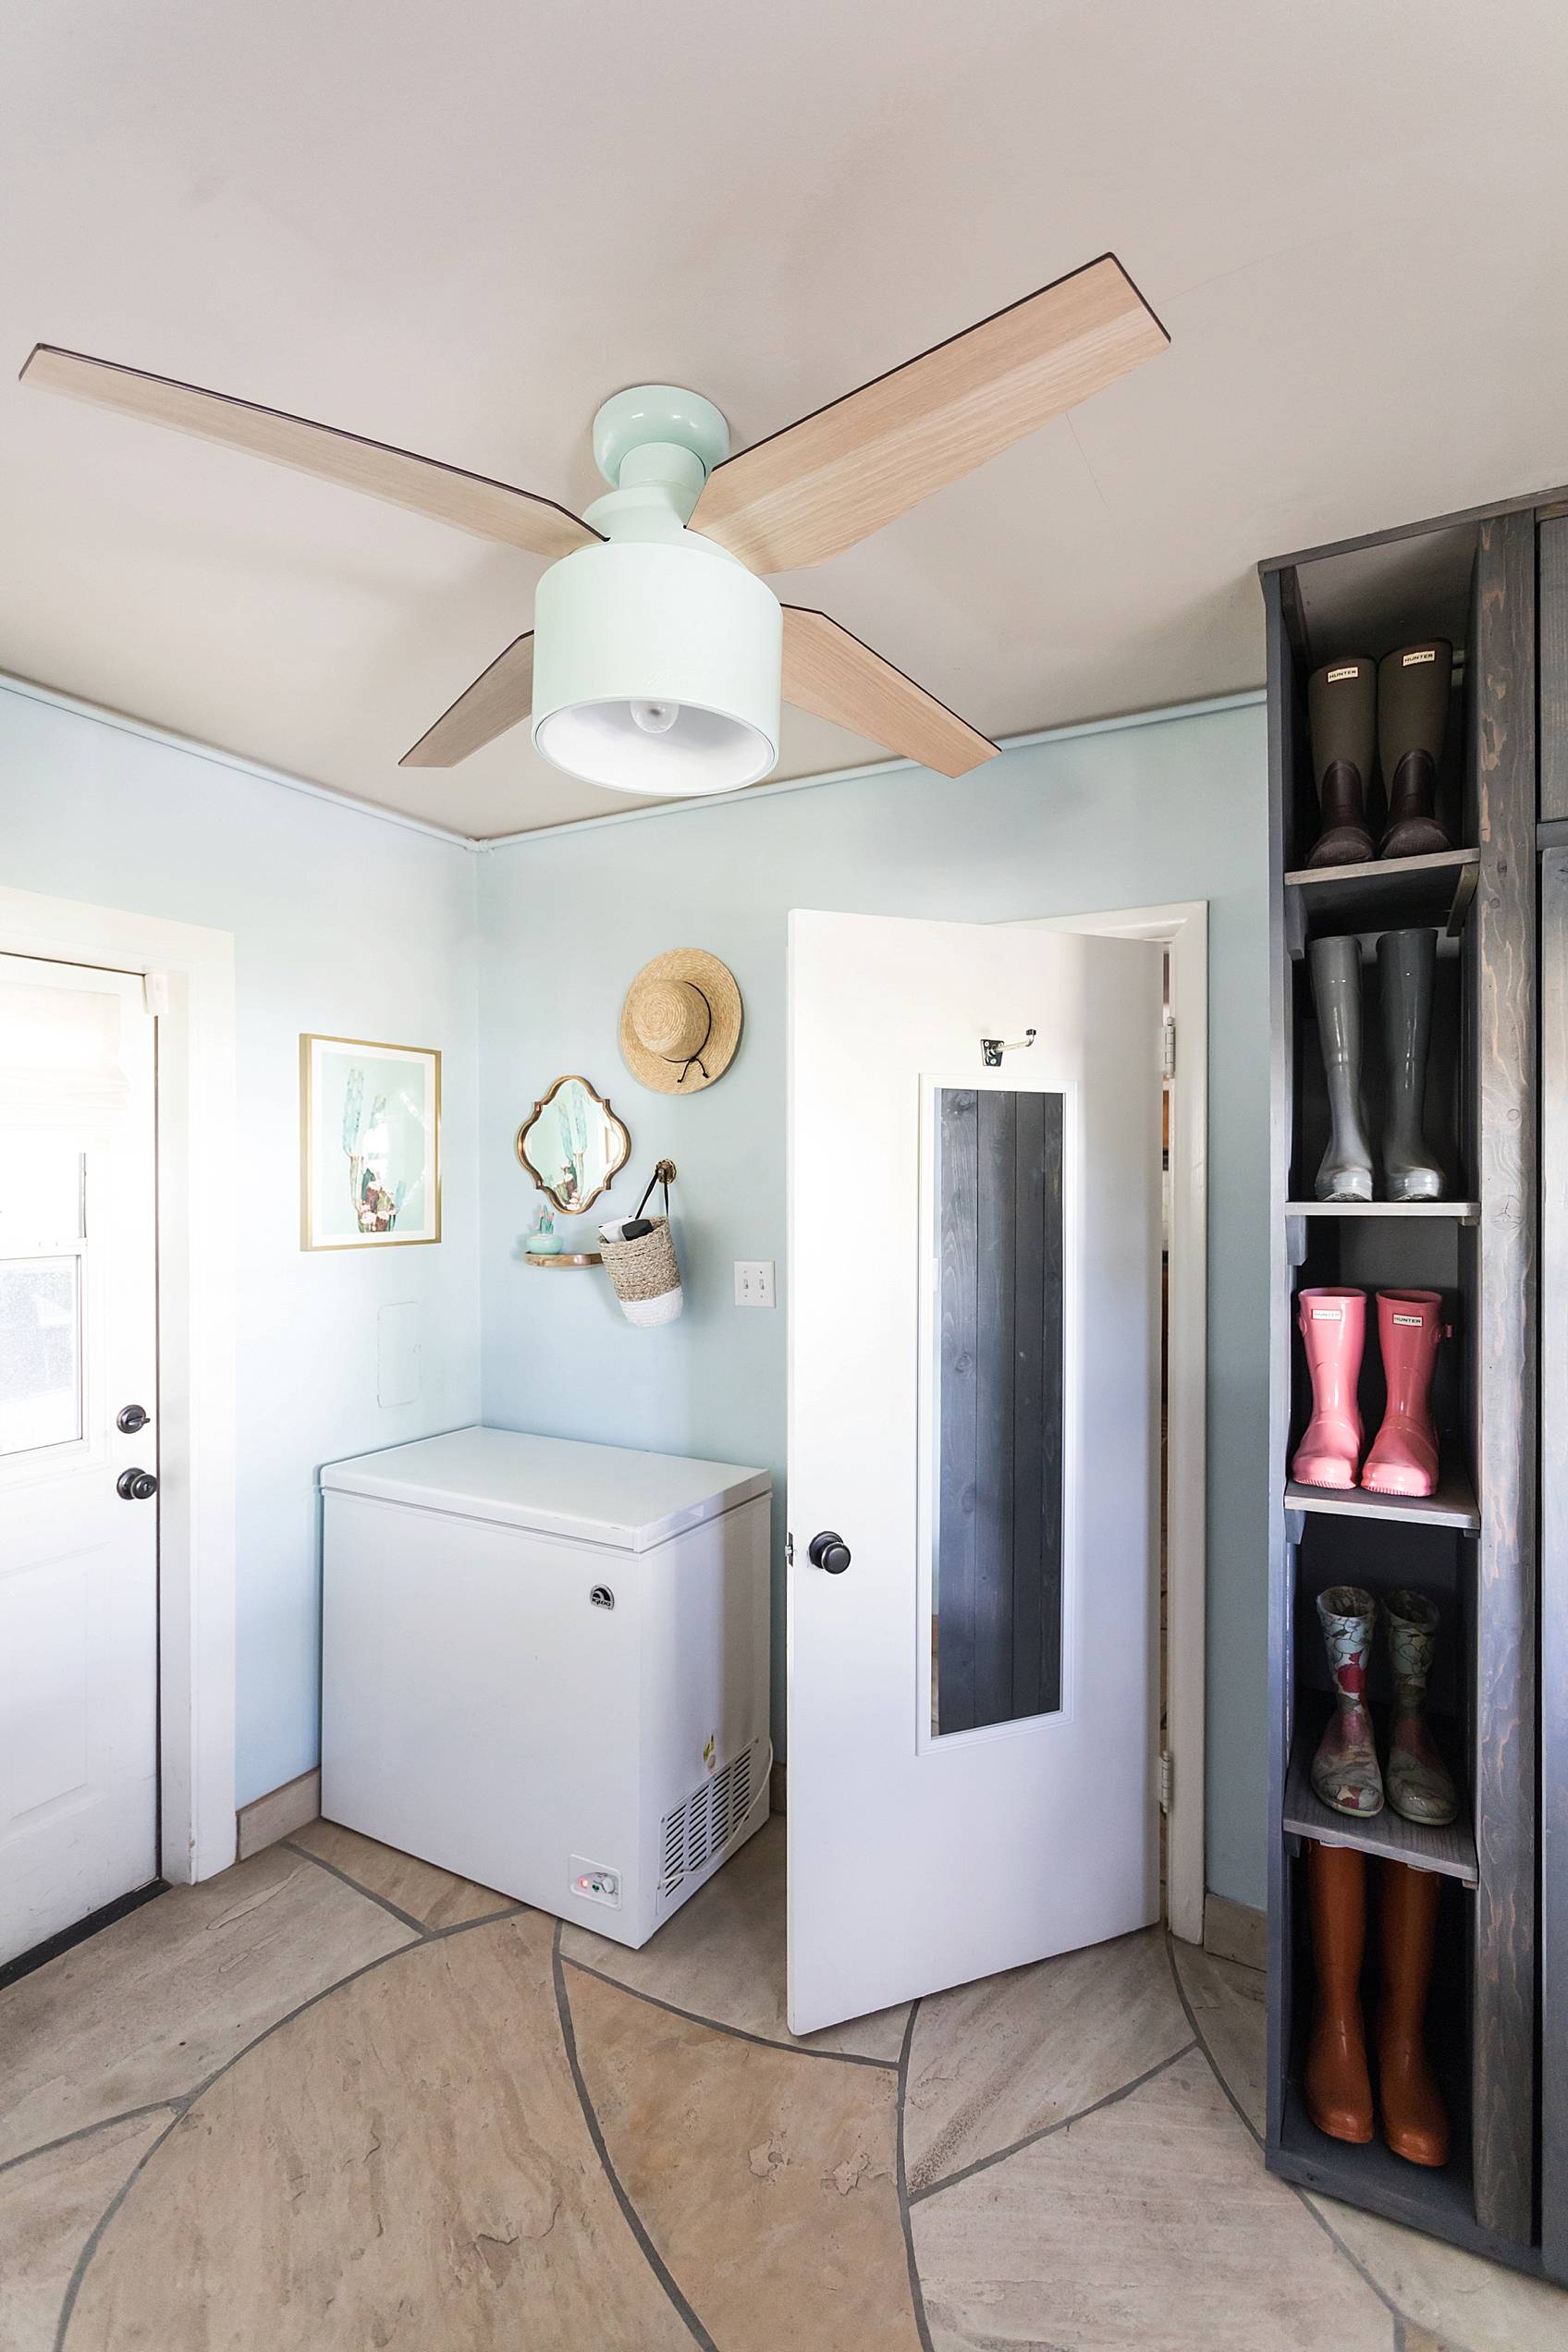 laundry mud room with custom cabinets rustic look with blue removable wallpaper in background and mint hunter fan Ikea cactus hunter boots display full length mirror